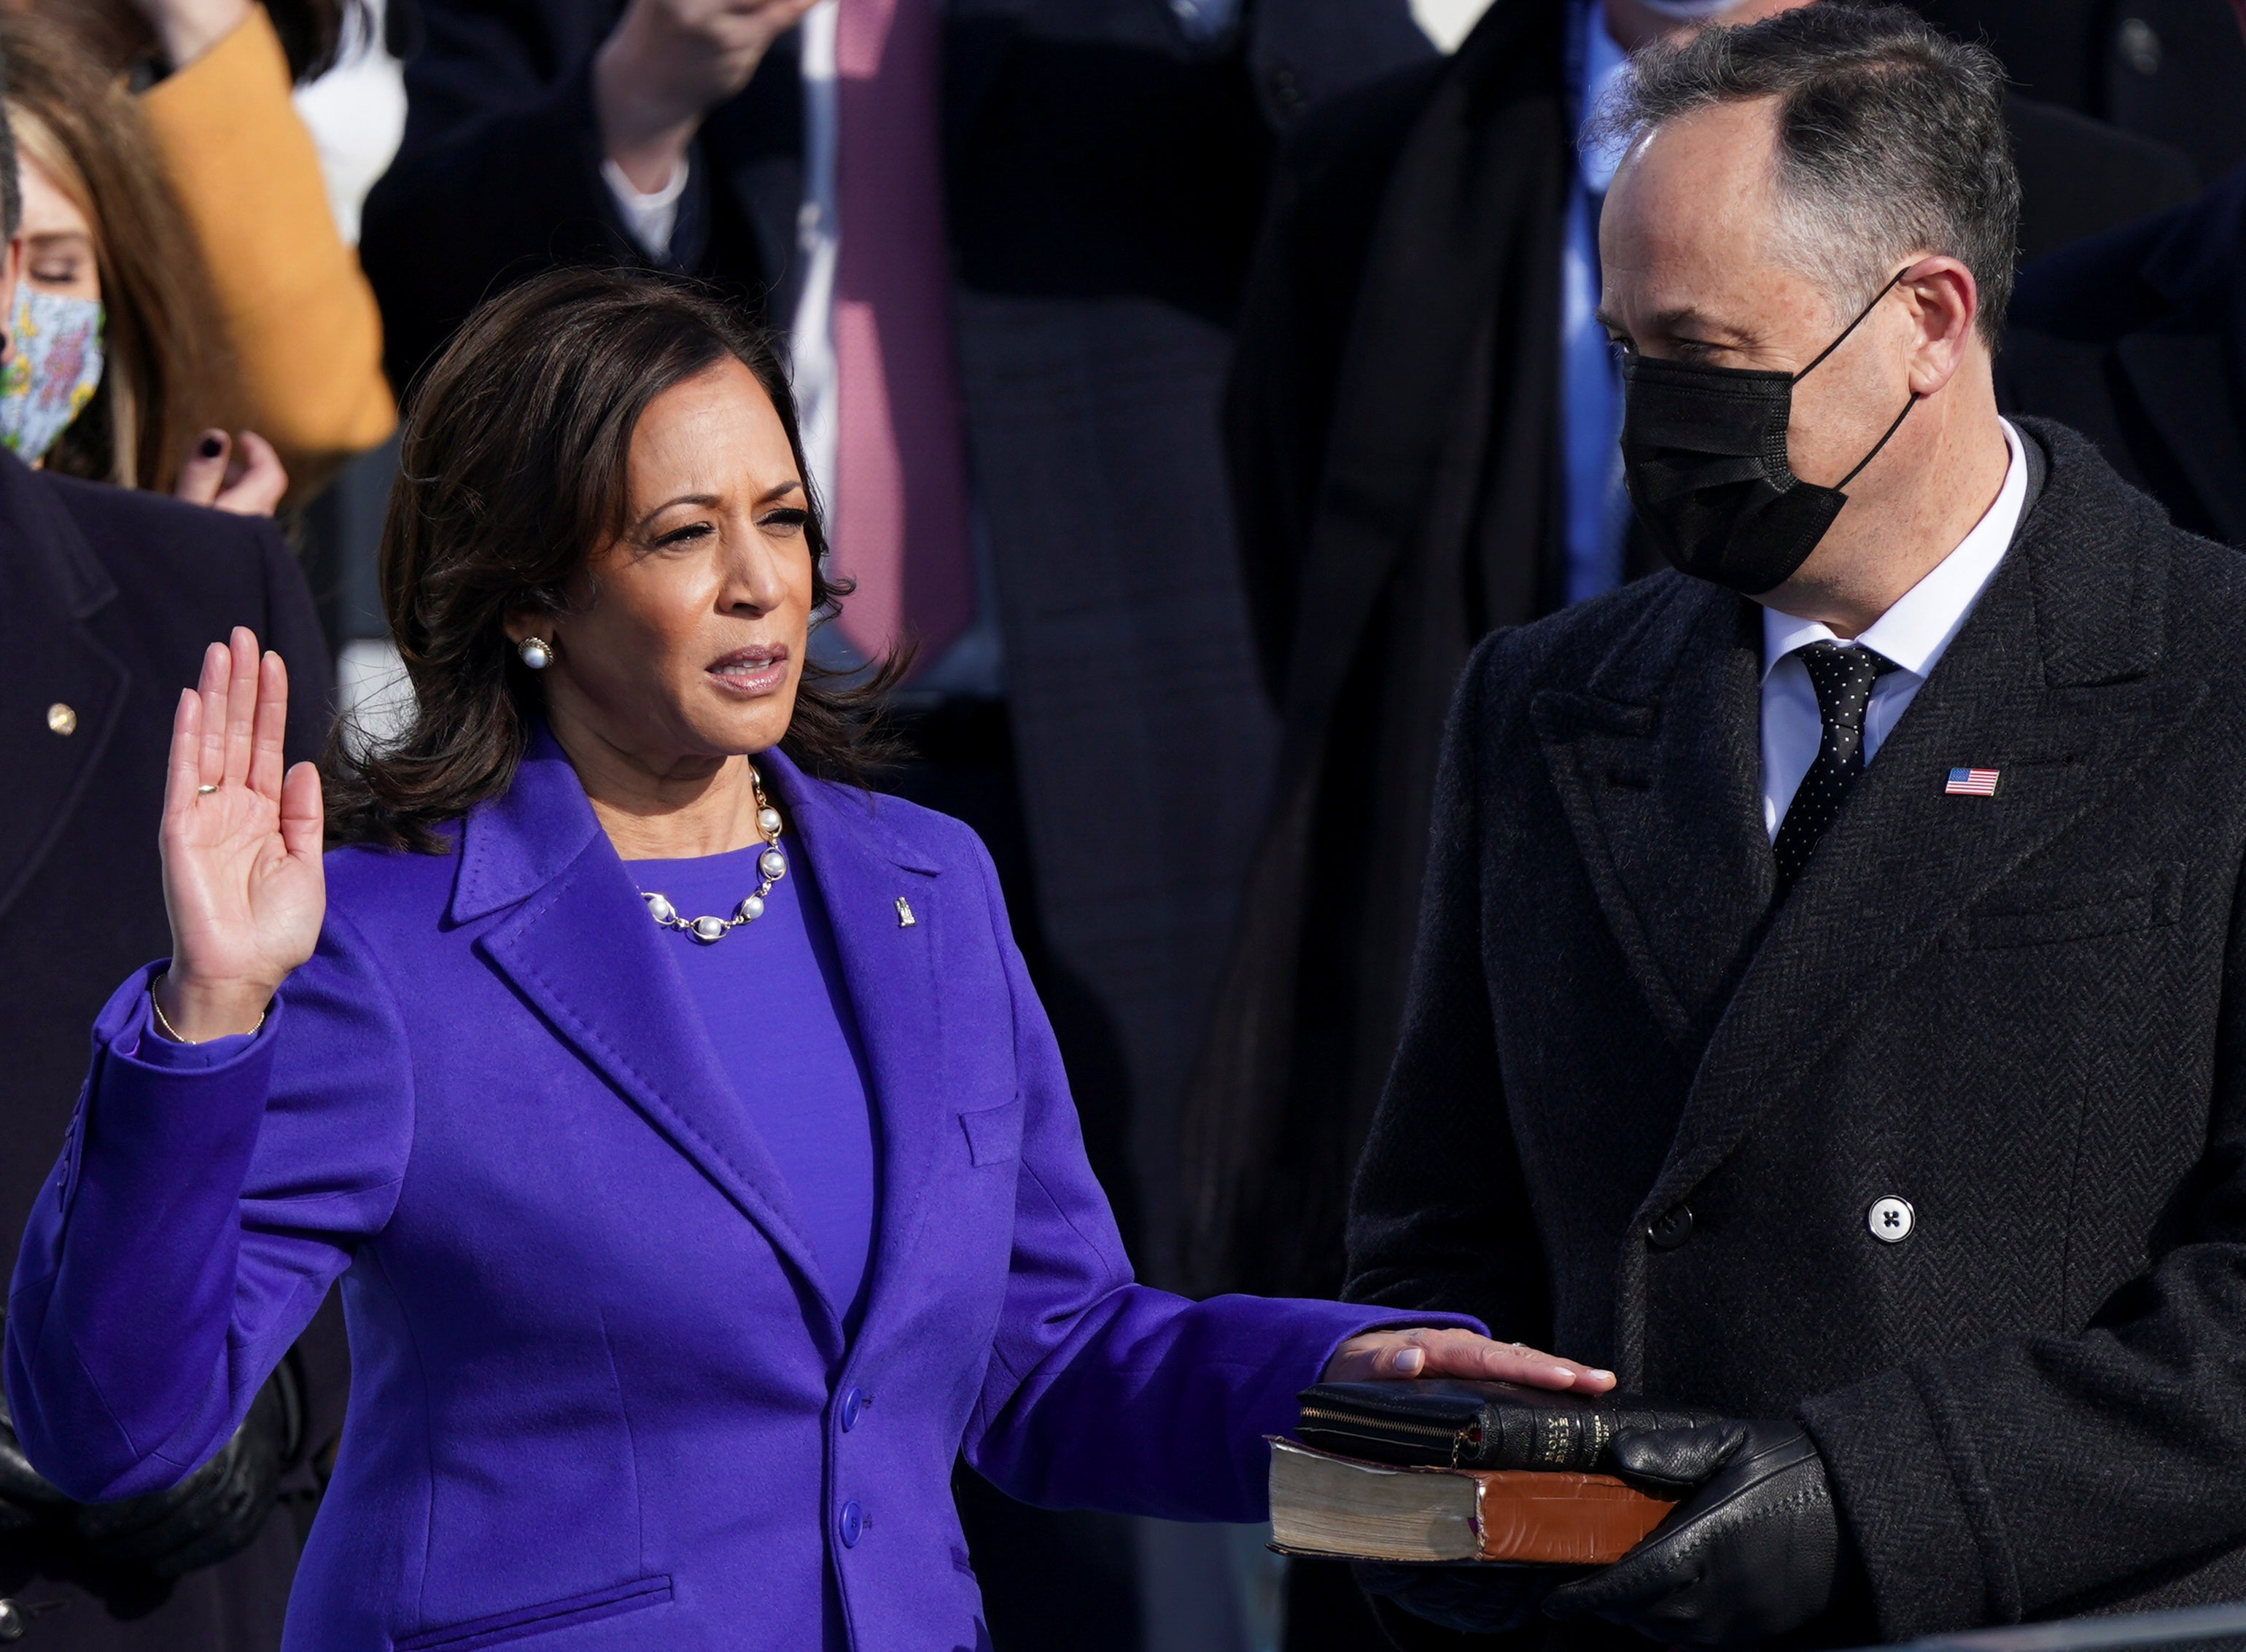 Kamala Harris is sworn in as vice president, becoming the first woman to hold the office in the nation’s history, as well as the first Black woman and first woman of South Asian descent to hold the title. Spouse Doug Emhoff holds the bible and also makes history in becoming the first ever first gentleman